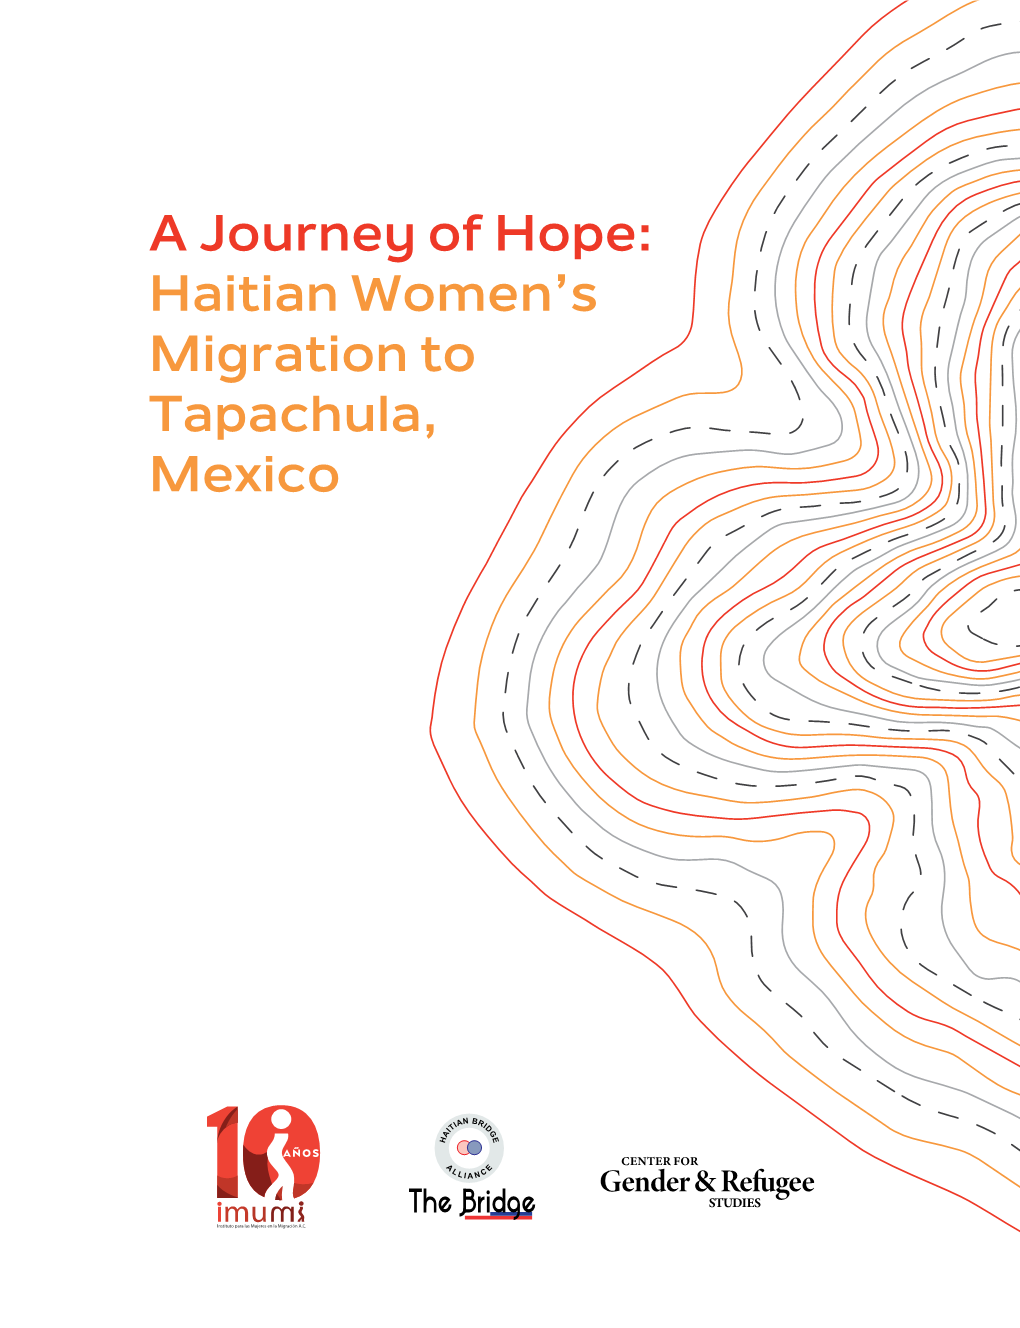 A Journey of Hope: Haitian Women's Migration to Tapachula, Mexico 12